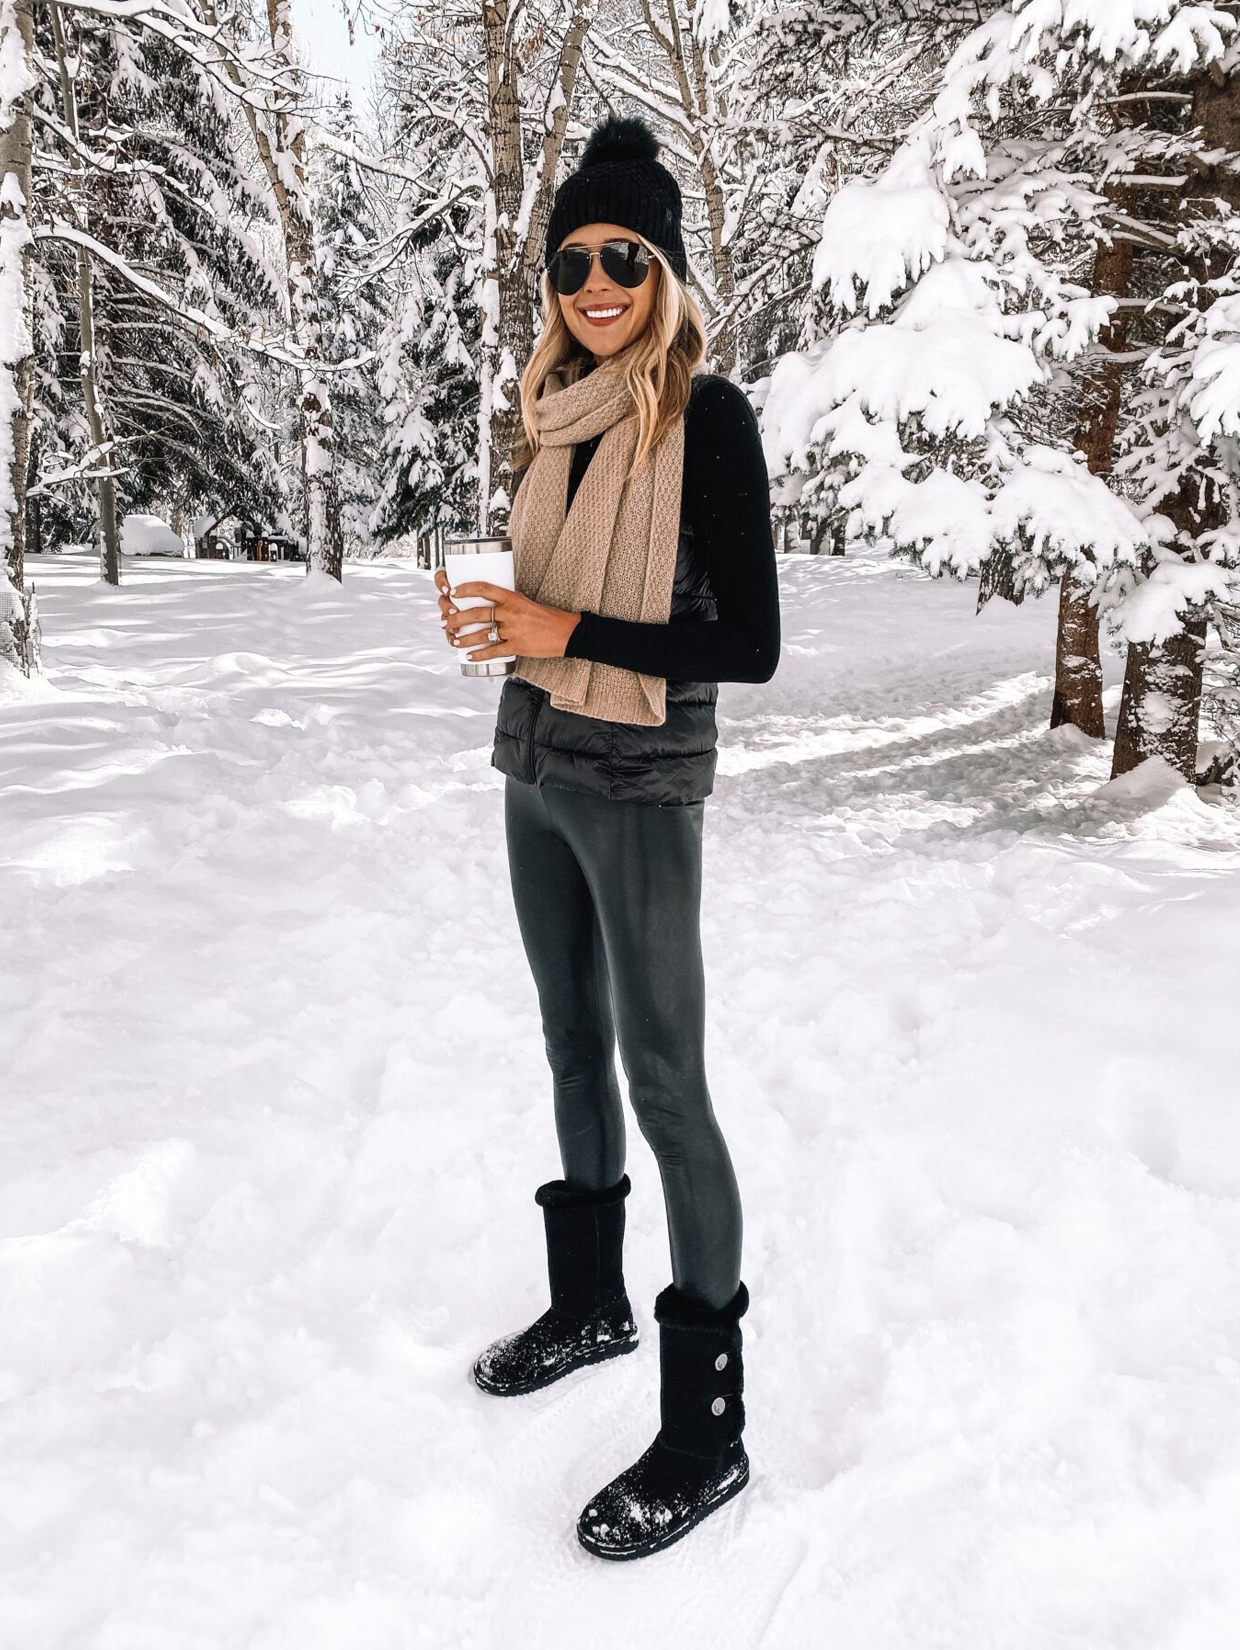 trip outfits for winter